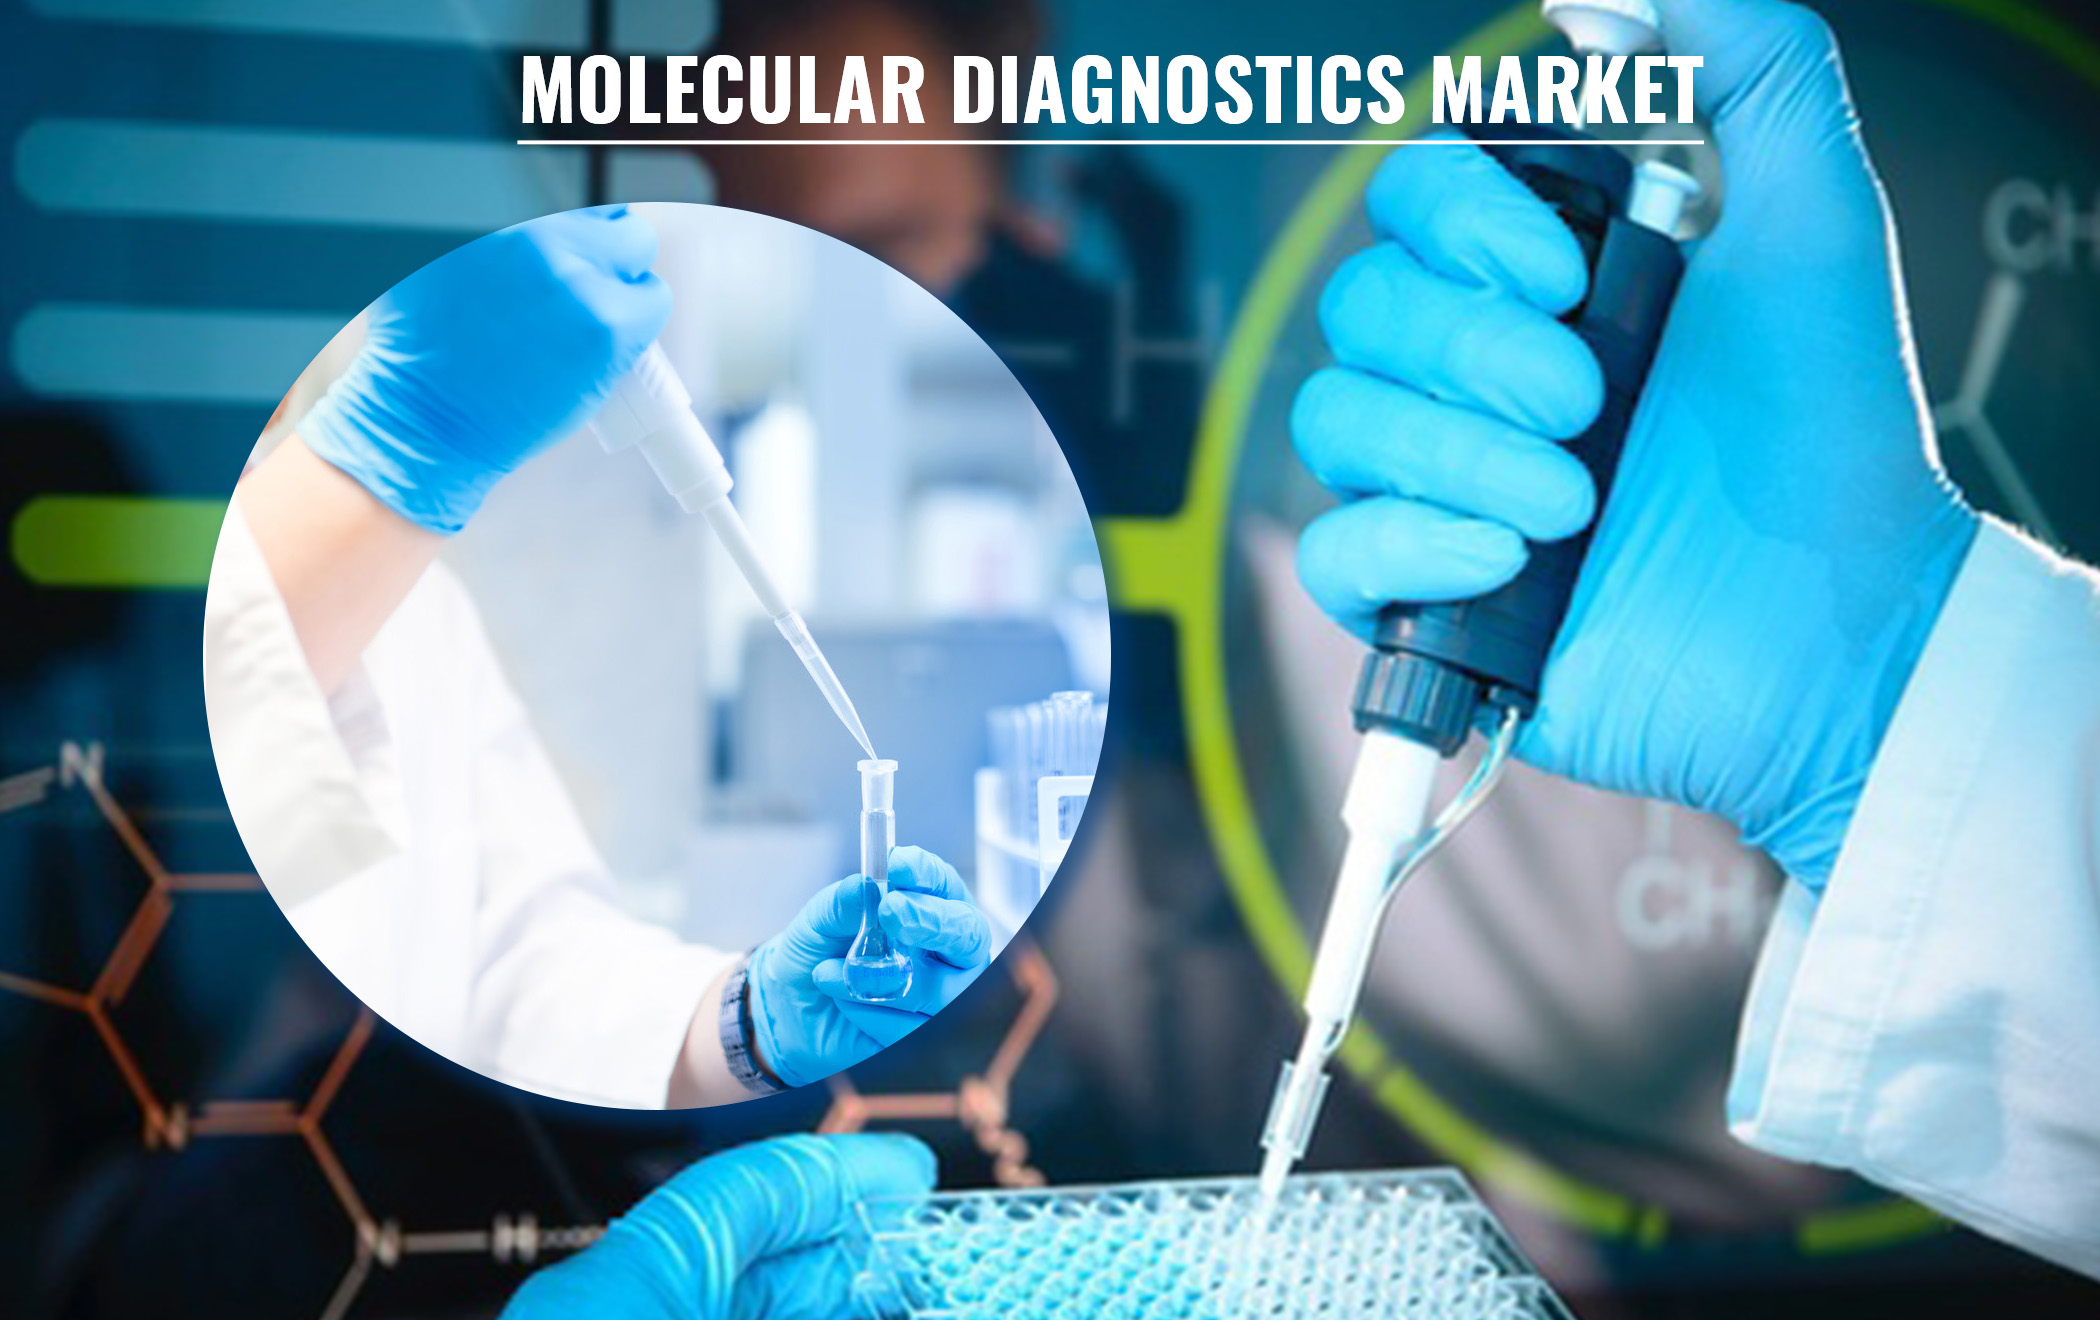 Global Molecular Diagnostics Market is Likely to Register a CAGR of 8.7% Between 2019 to 2030